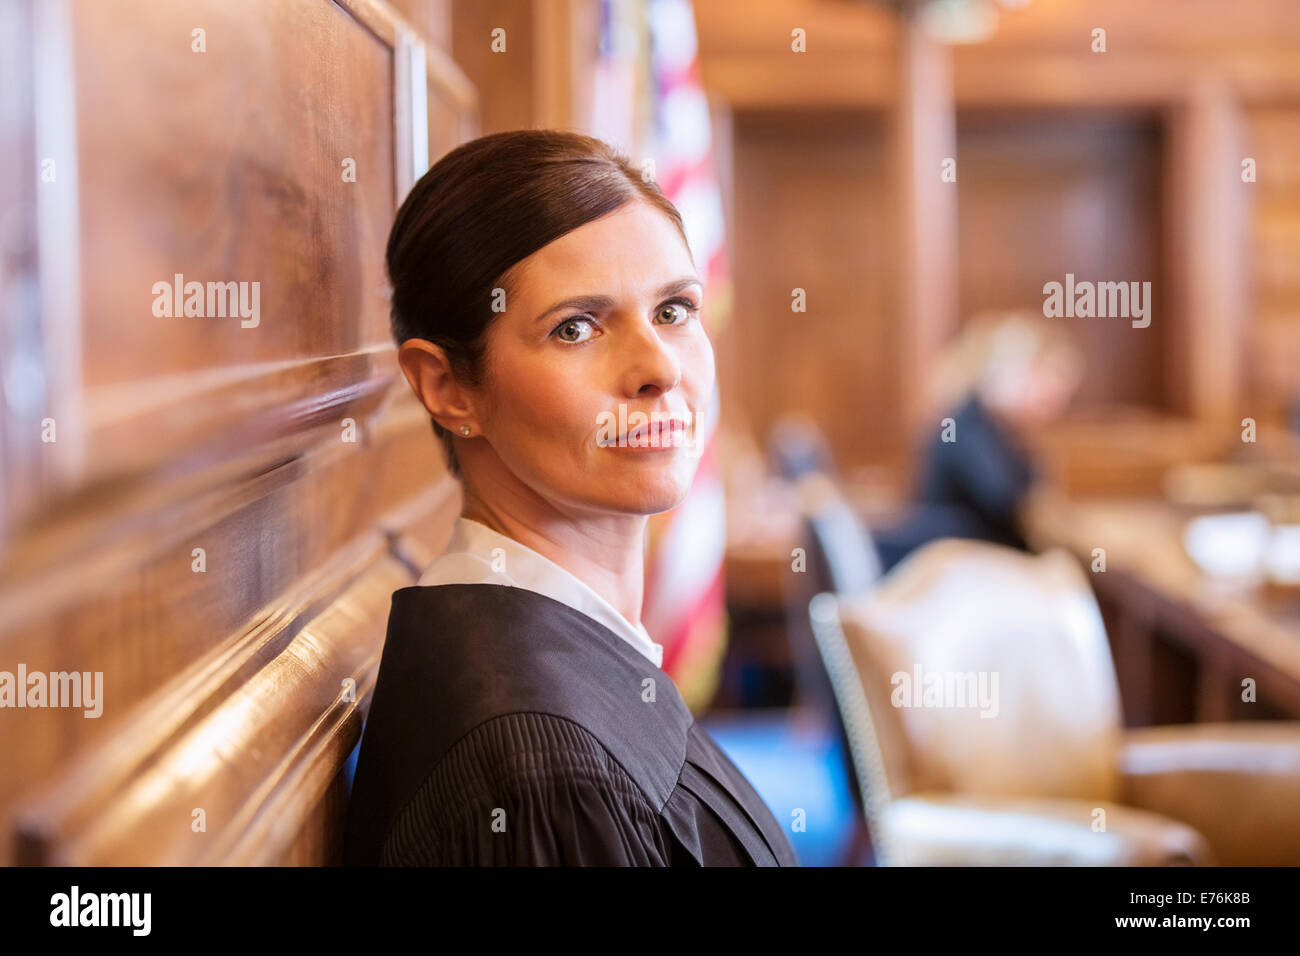 Judge standing in courtroom Stock Photo